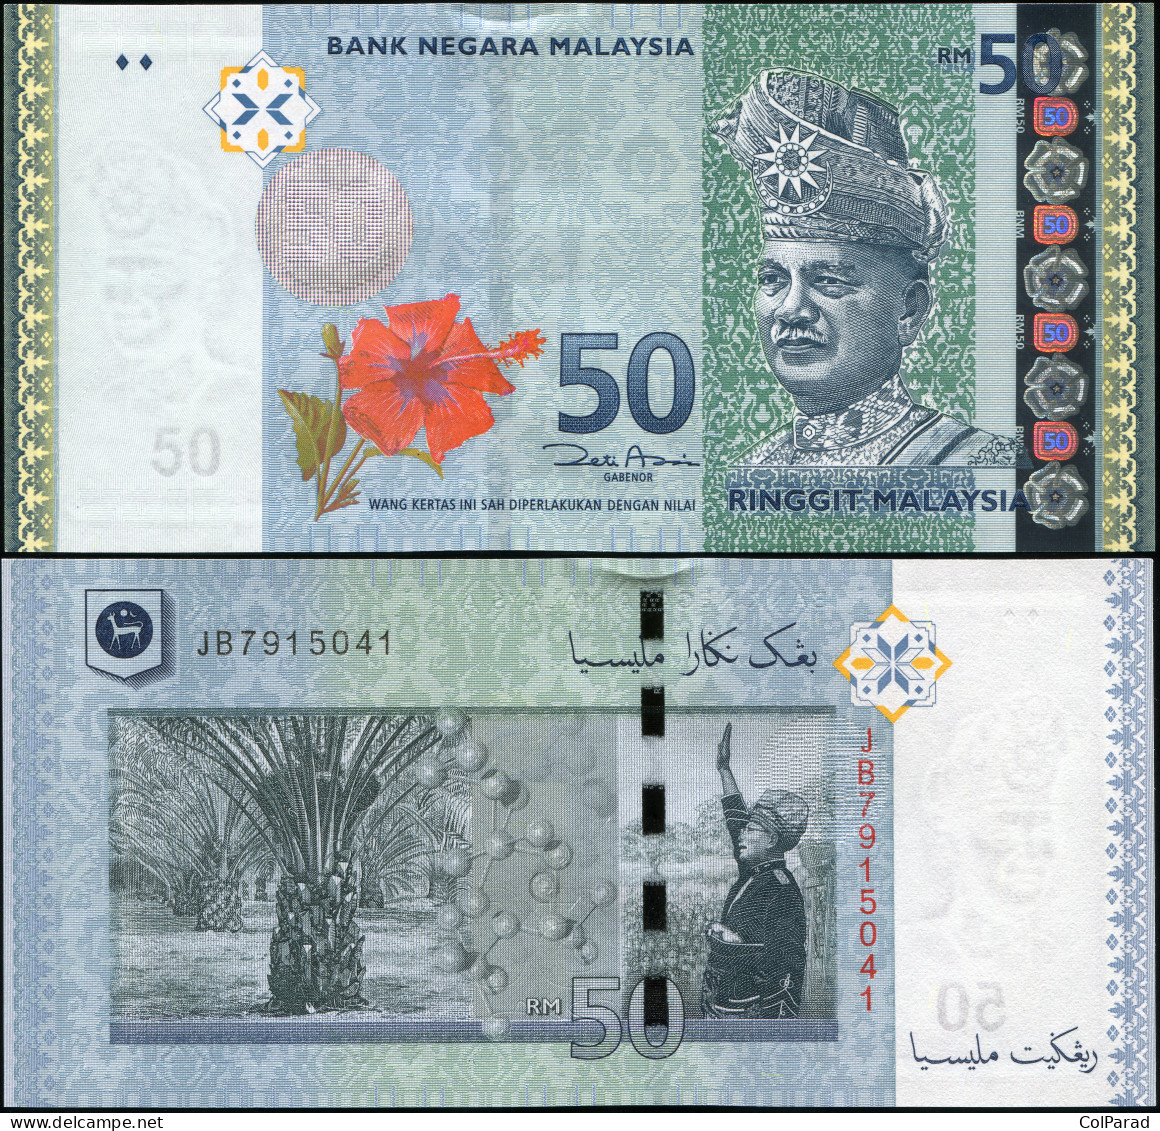 MALAYSIA 50 RINGGIT - ND (2009) - Paper Unc - P.50a Banknote - Malaysia